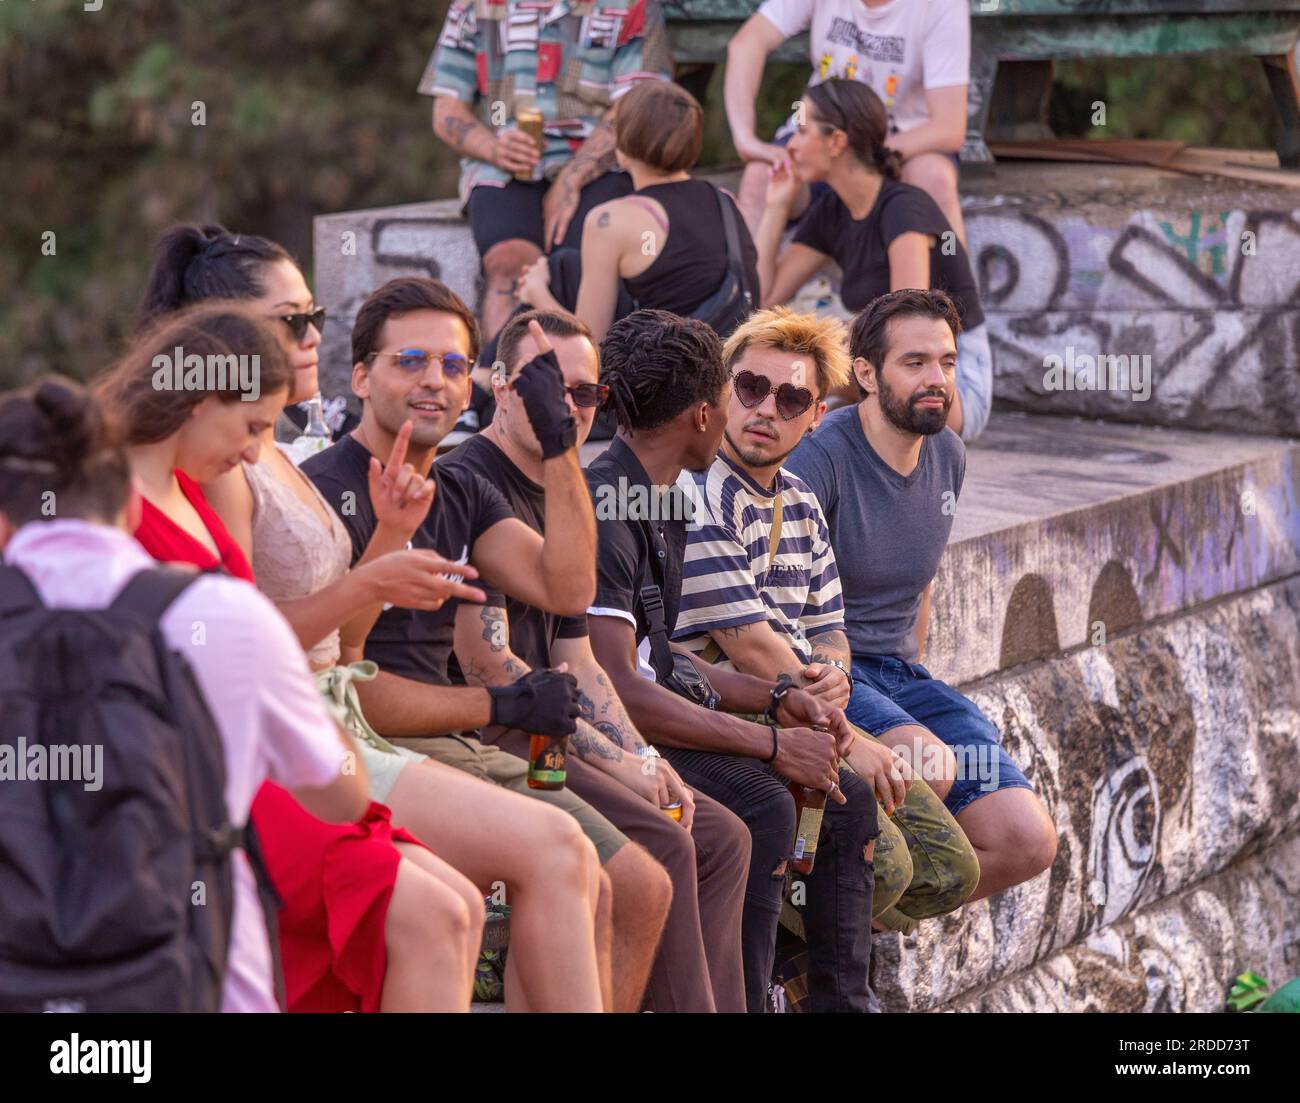 LETNA PARK, PRAGUE, CZECH REPUBLIC, EUROPE - Youth hanging out at Metronome in Letna Park. Stock Photo